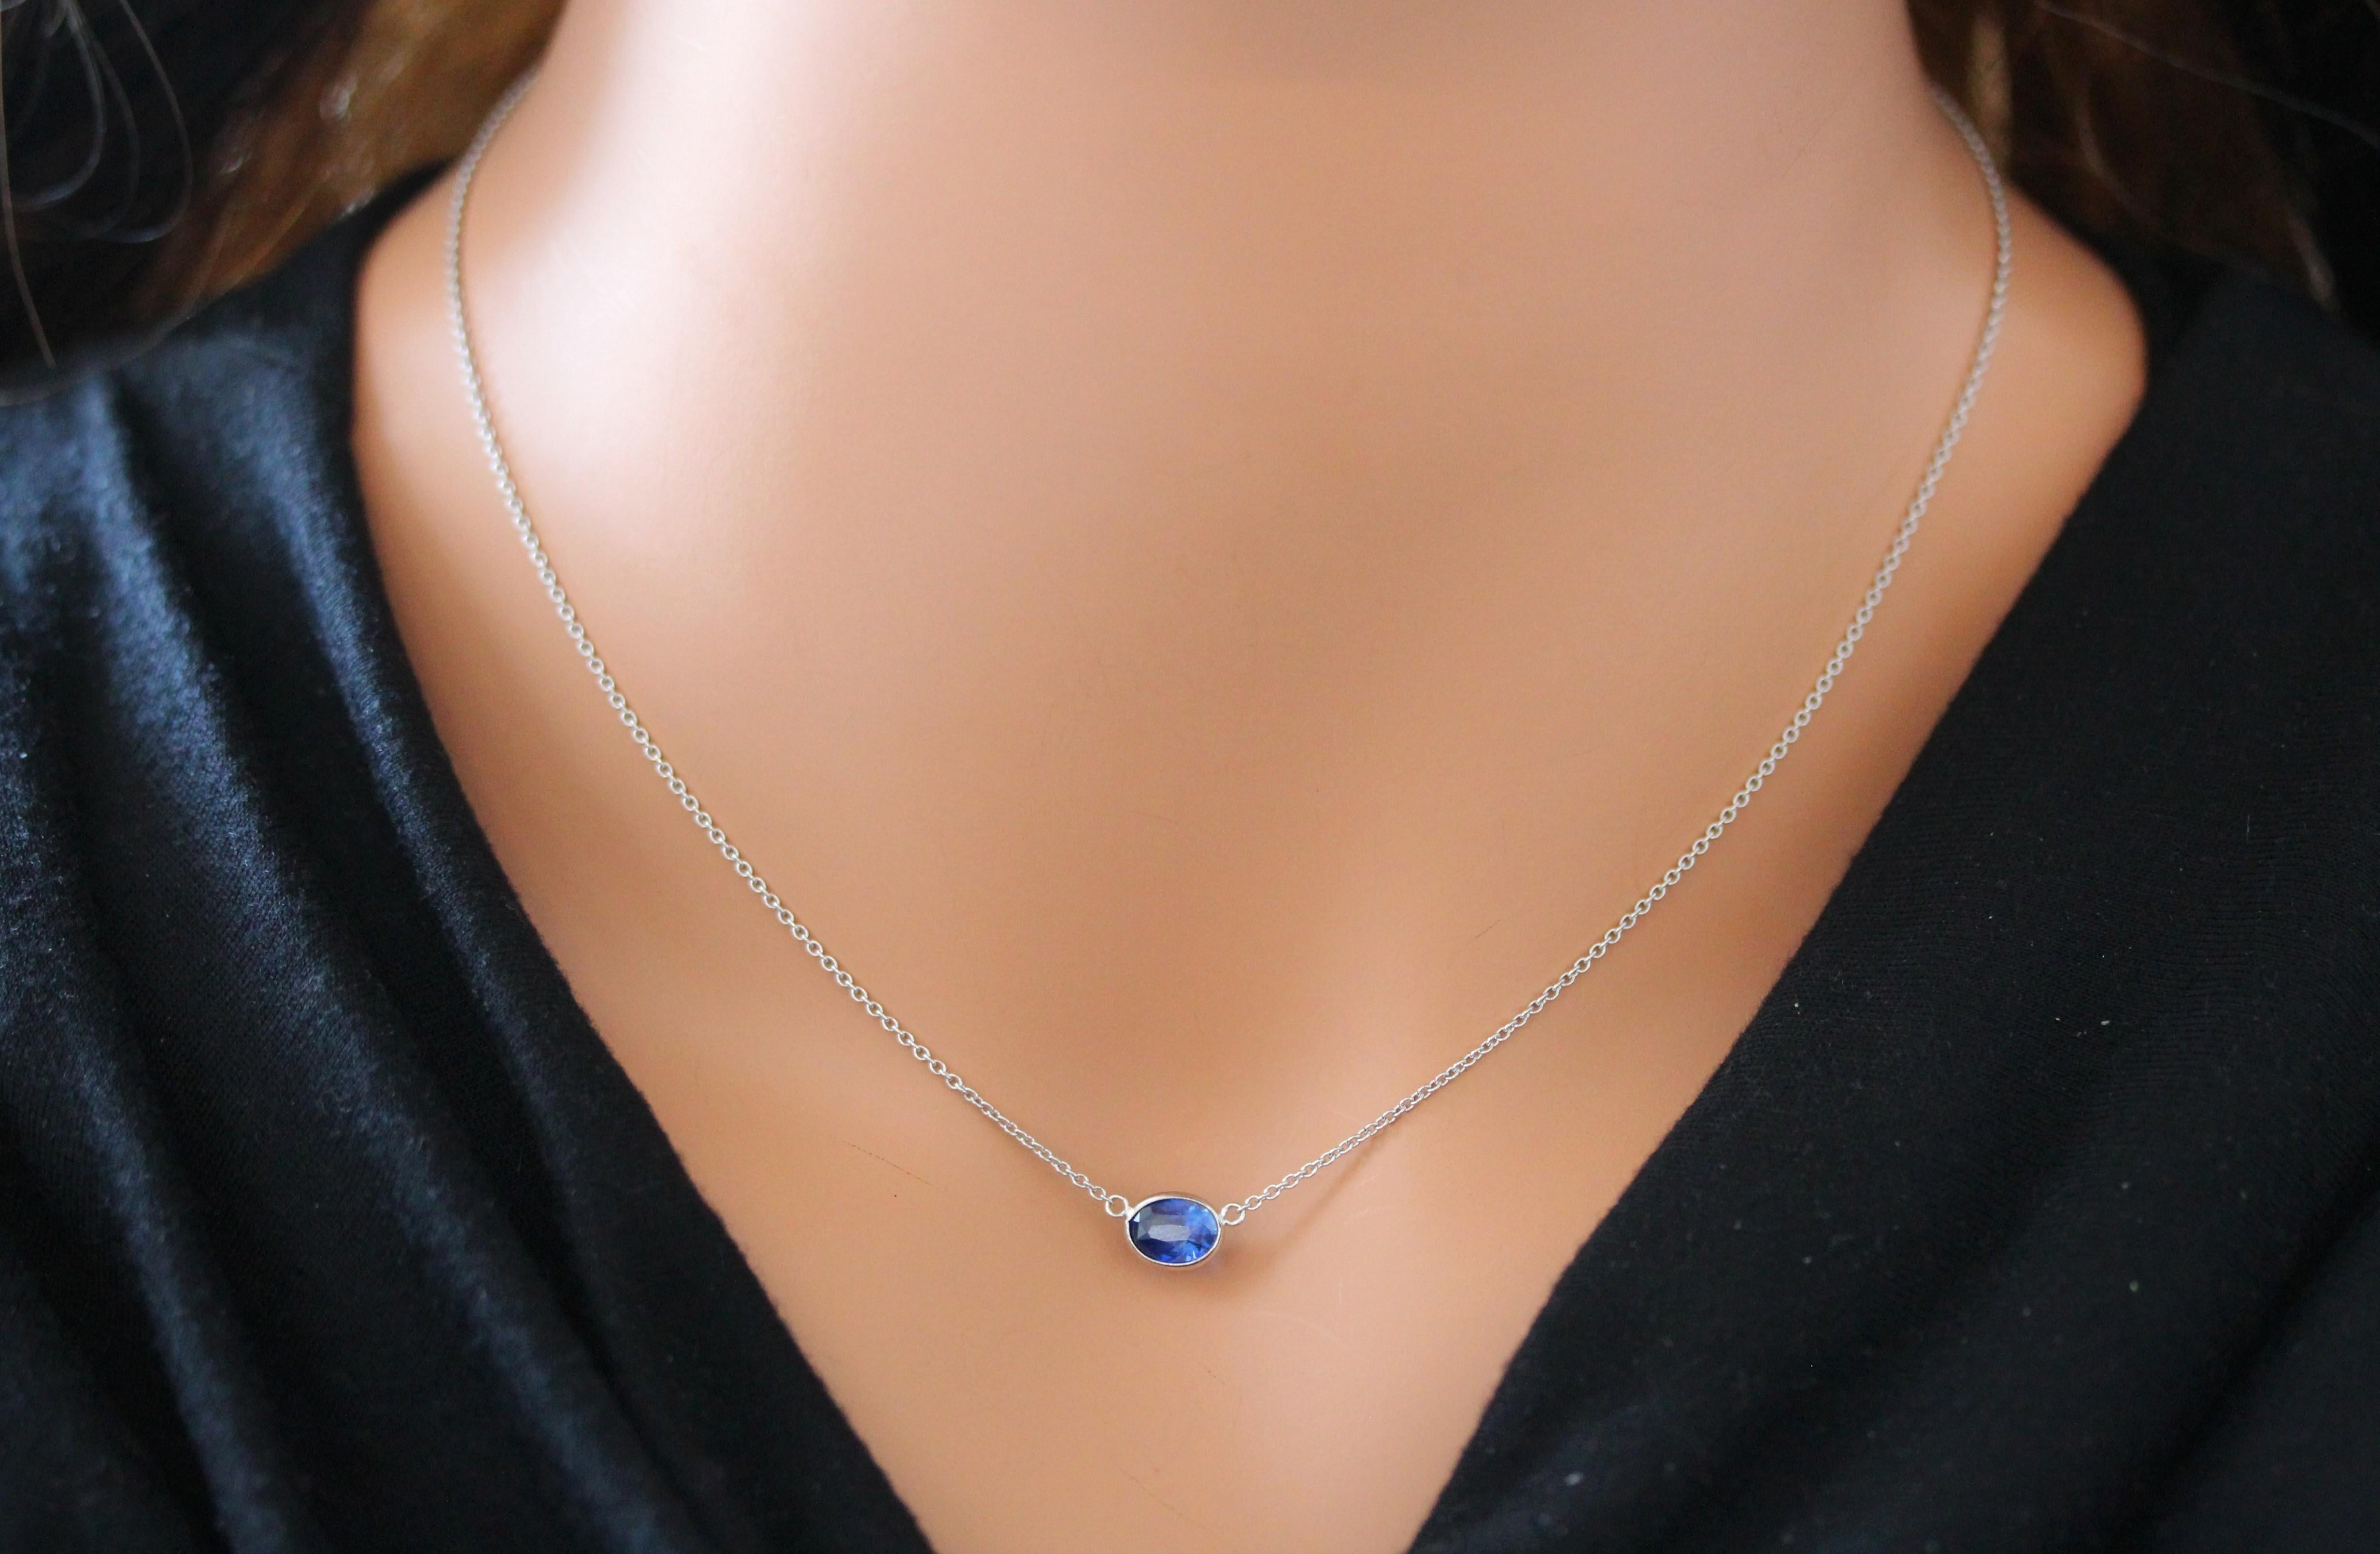 Contemporary 1.53 Carat Oval Sapphire Blue Fashion Necklaces In 14k White Gold For Sale